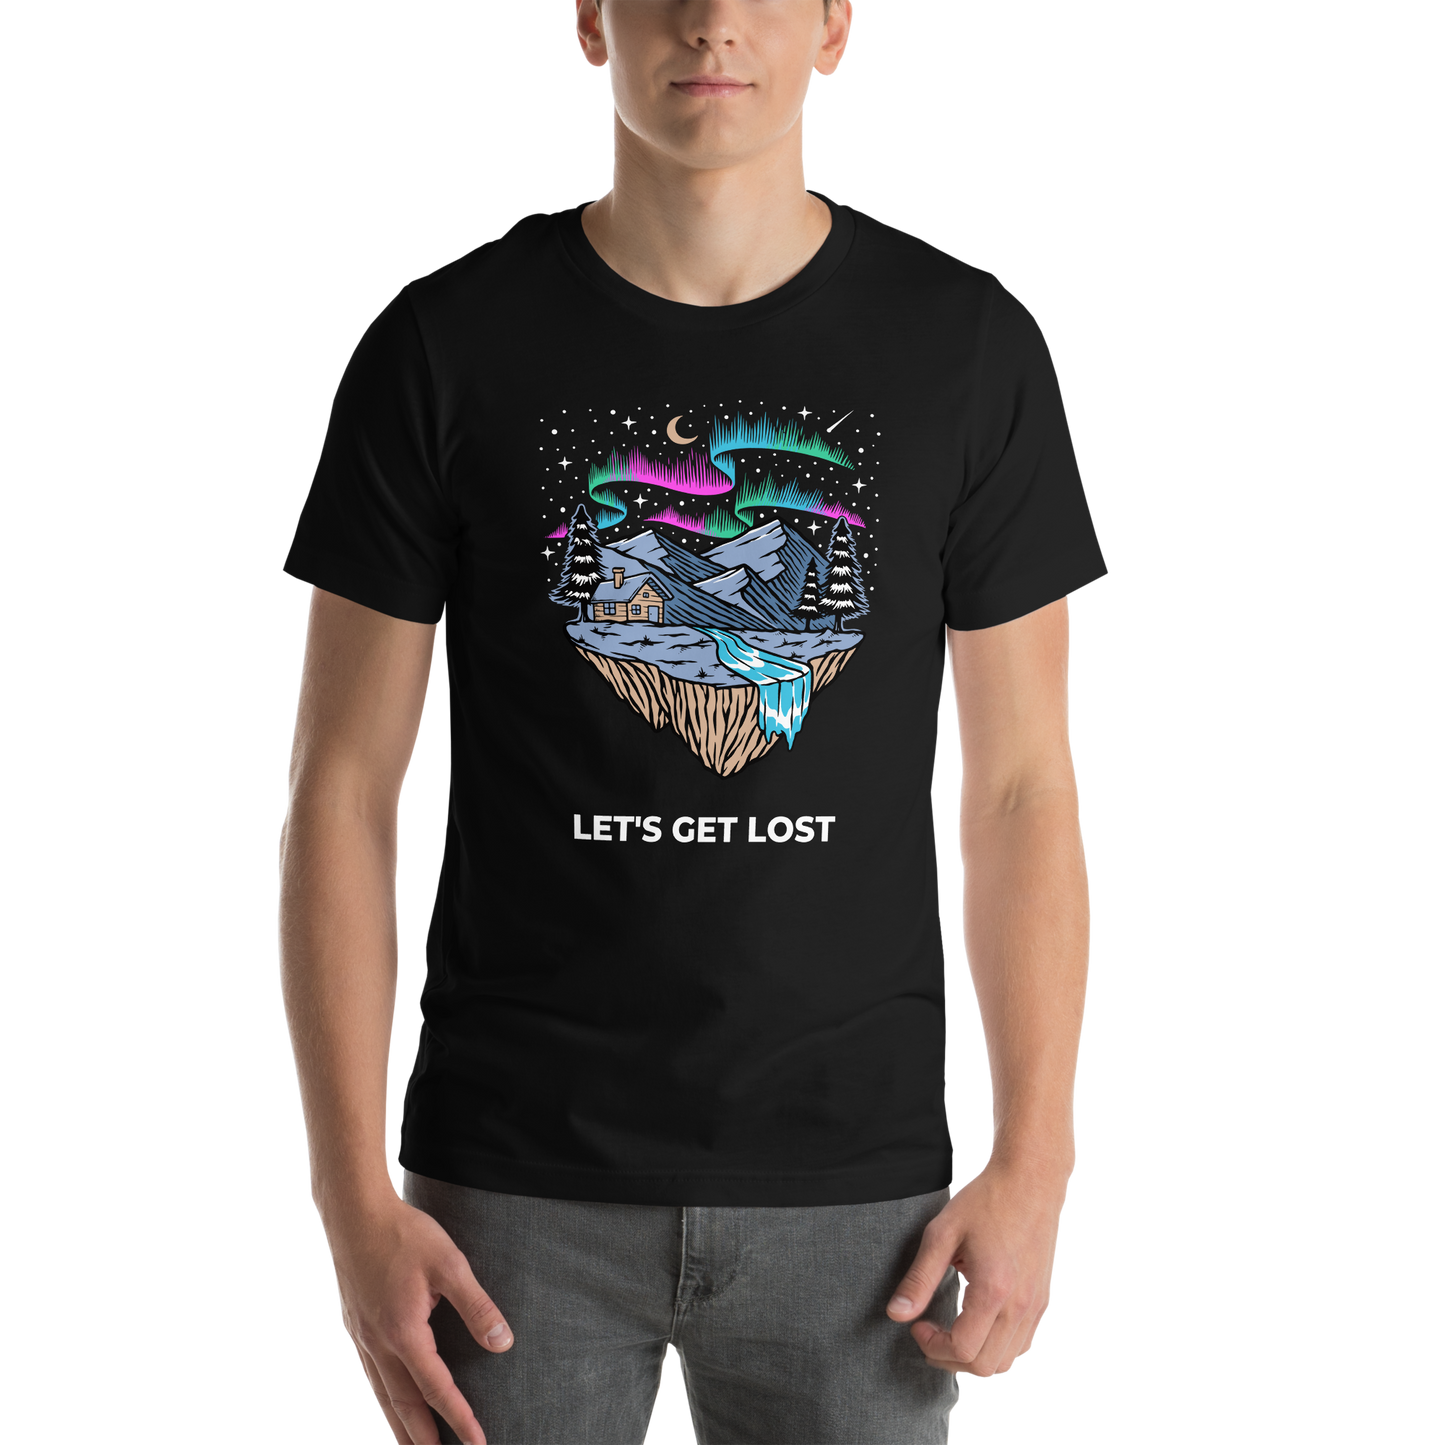 Man wearing a Black Premium Let's Get Lost Tee featuring a mesmerizing night sky, adorned with stars and aurora borealis graphic on the chest - Cool Graphic Northern Lights Tees - Boozy Fox